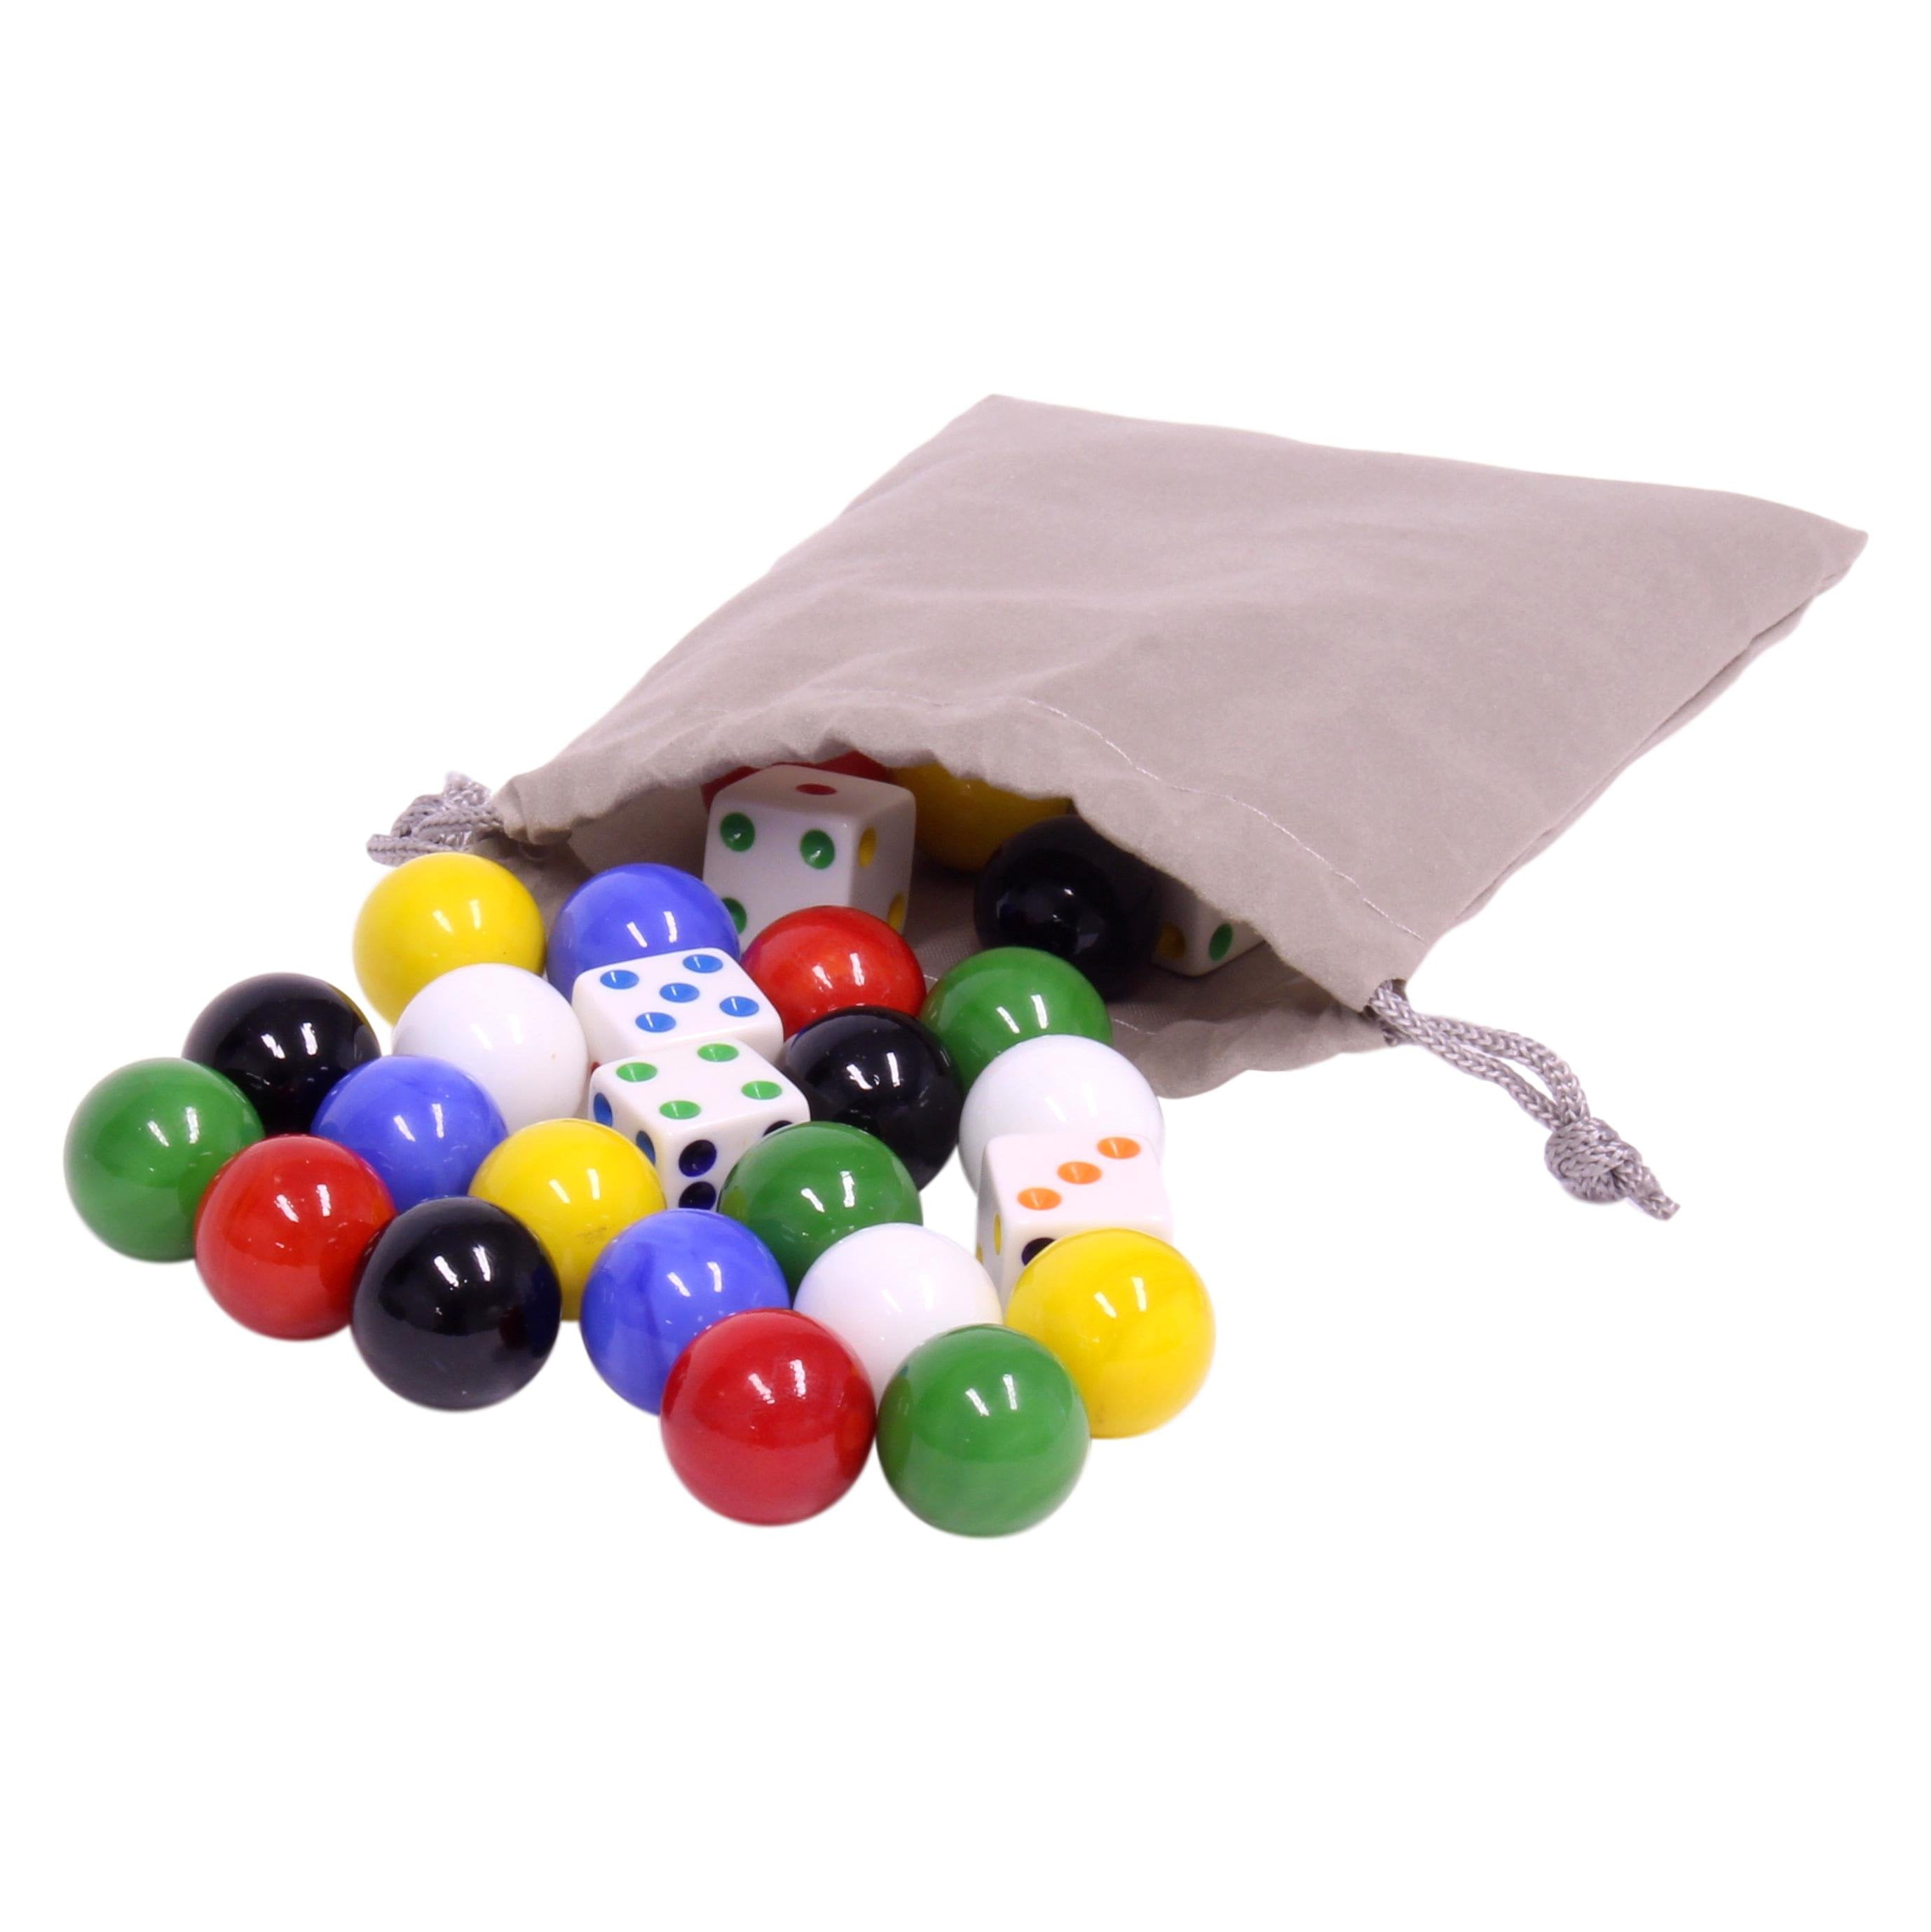 30 9/16" CHINESE CHECKER MARBLES and 2 DICE WAHOO AGGRAVATION GAME REPLACEMENT 